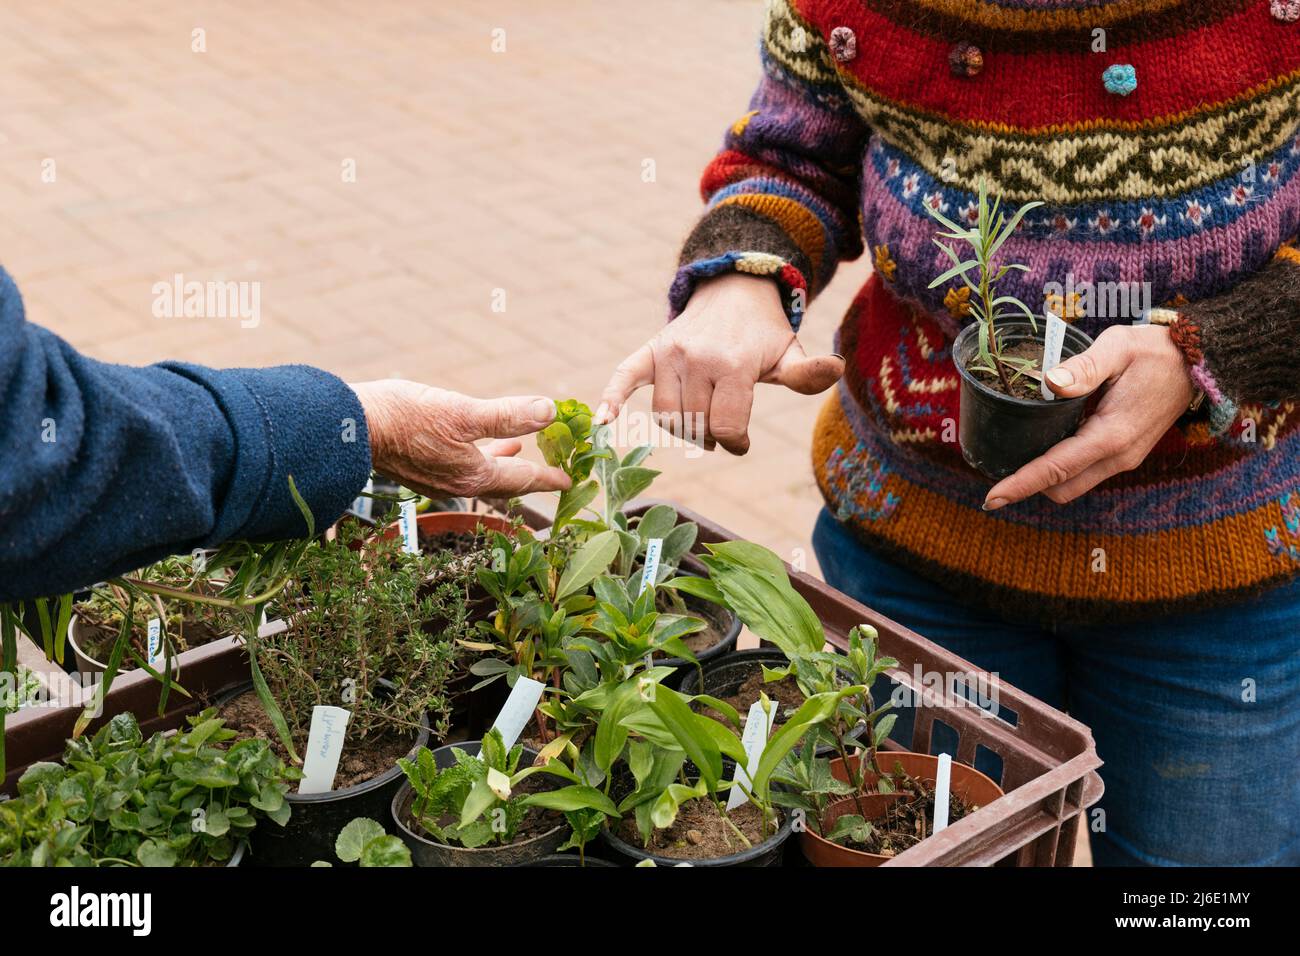 Two gardeners swapping plants and exchanging knowledge about cultivation during a plant swap event. Stock Photo